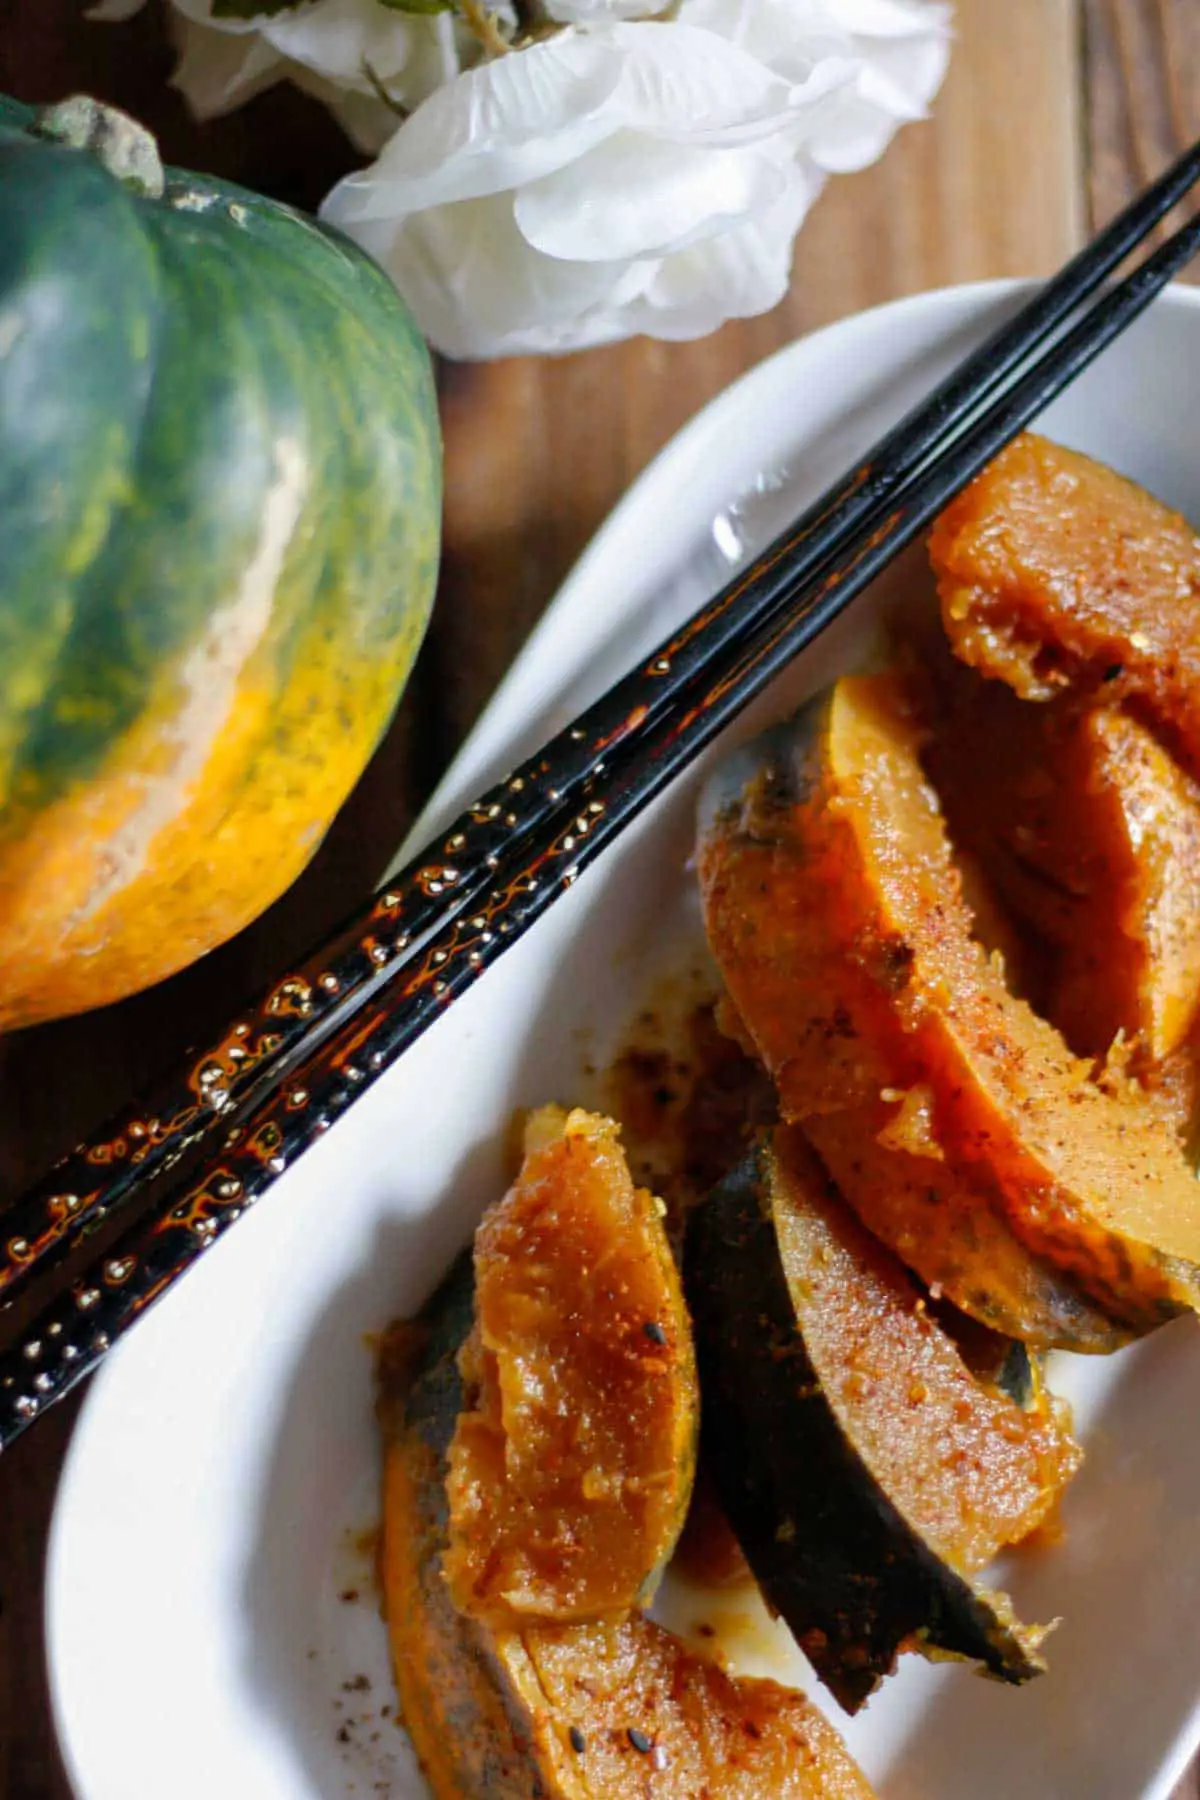 Wedges of cooked acorn squash with sprinkles of Japanese chili pepper on a white dish with chopsticks resting on the side, an acorn squash to the left of the white dish and a few white rose petals.